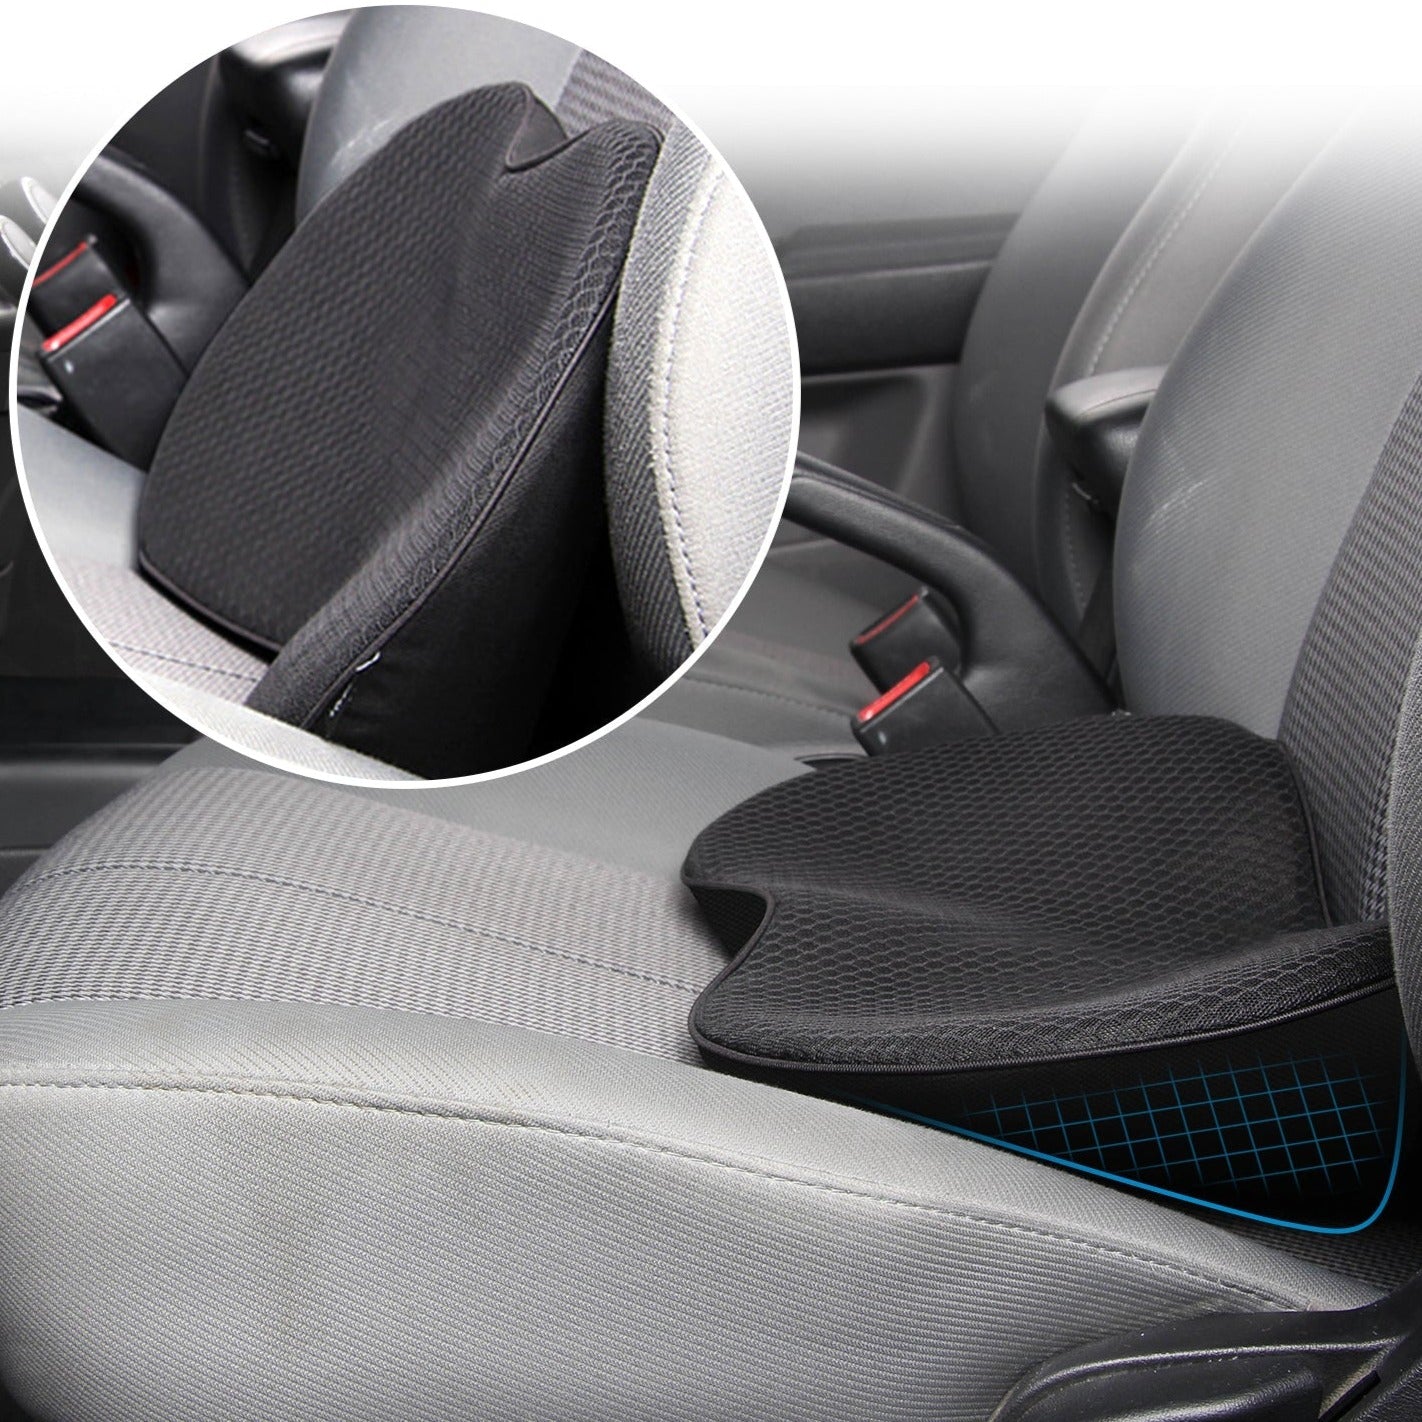  Car Booster Seat Cushion Raise The Height for Short